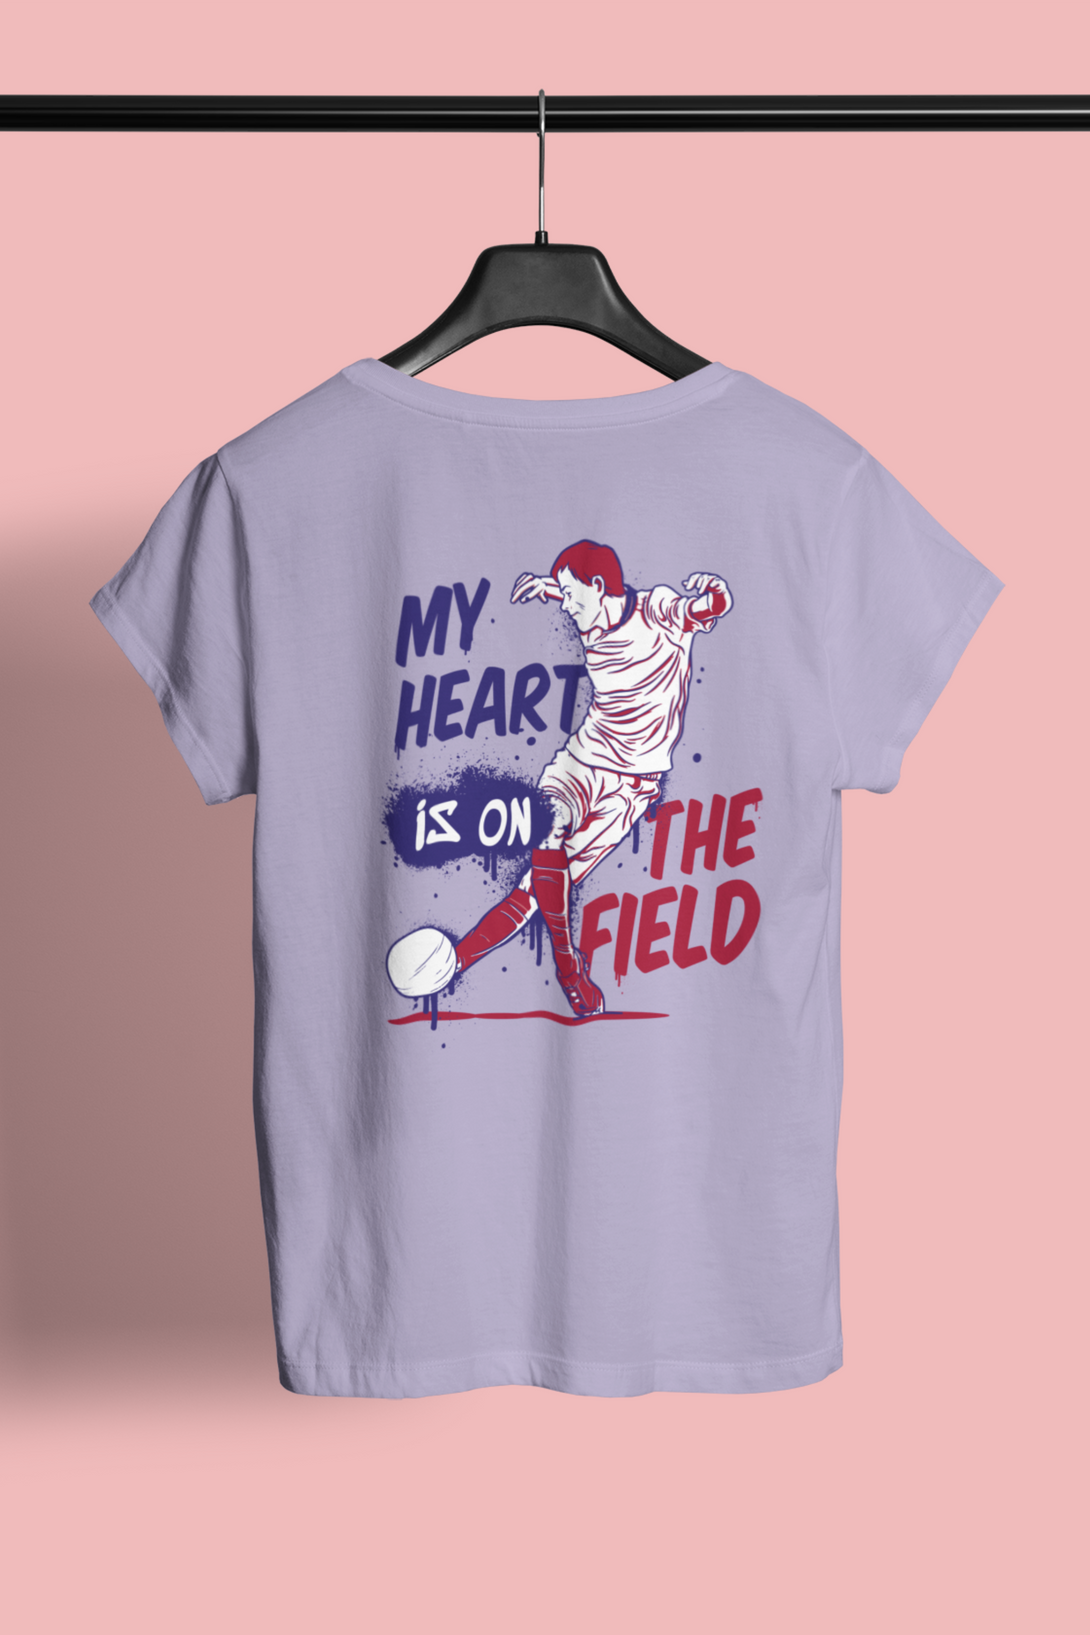 My Heart Is On The Field Printed T-Shirt For Men - WowWaves - 4